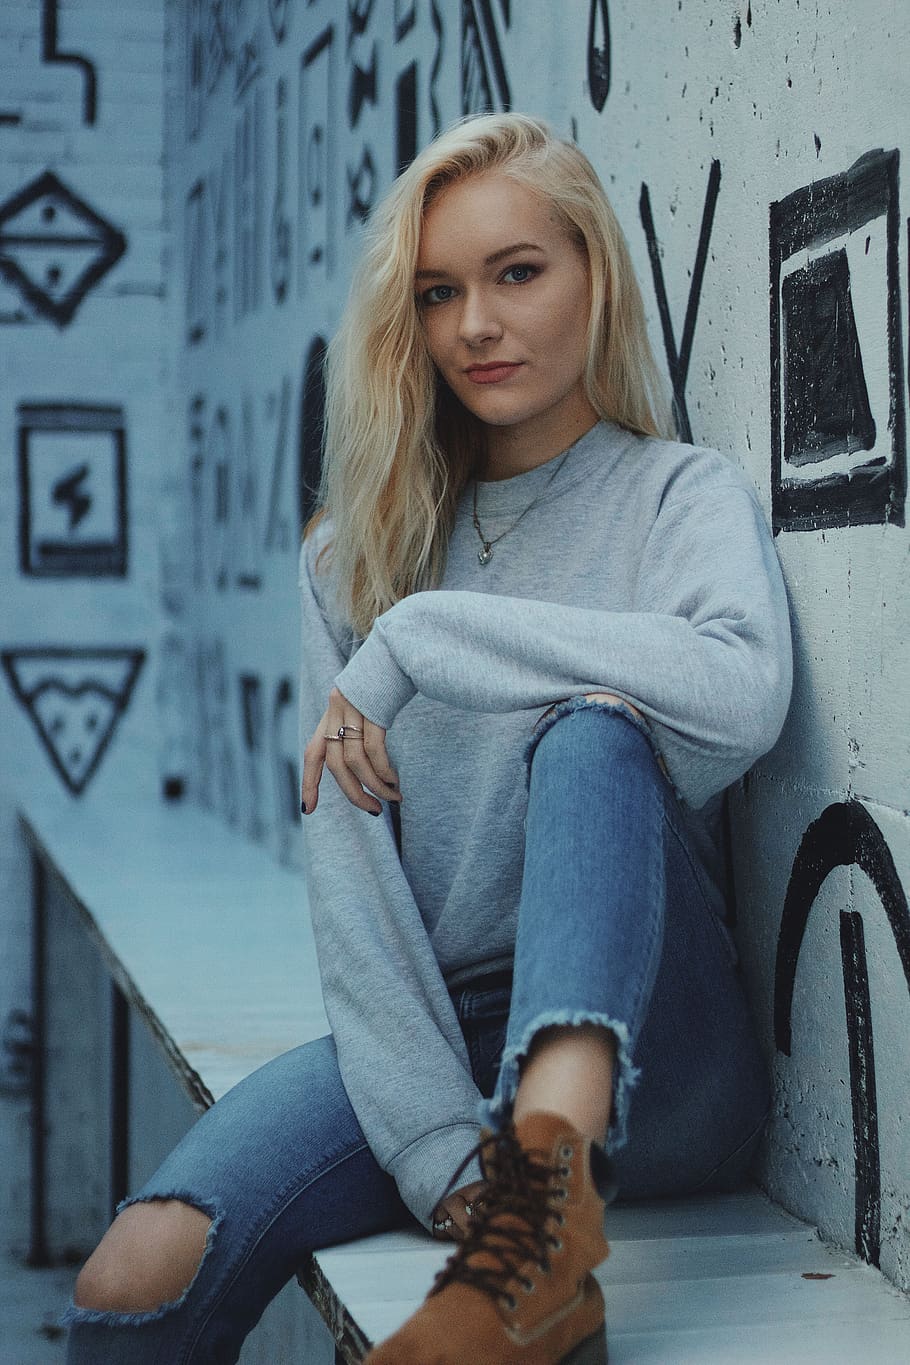 people, woman, fashion, model, beauty, blonde, ripped jeans, boots, one person, blond hair